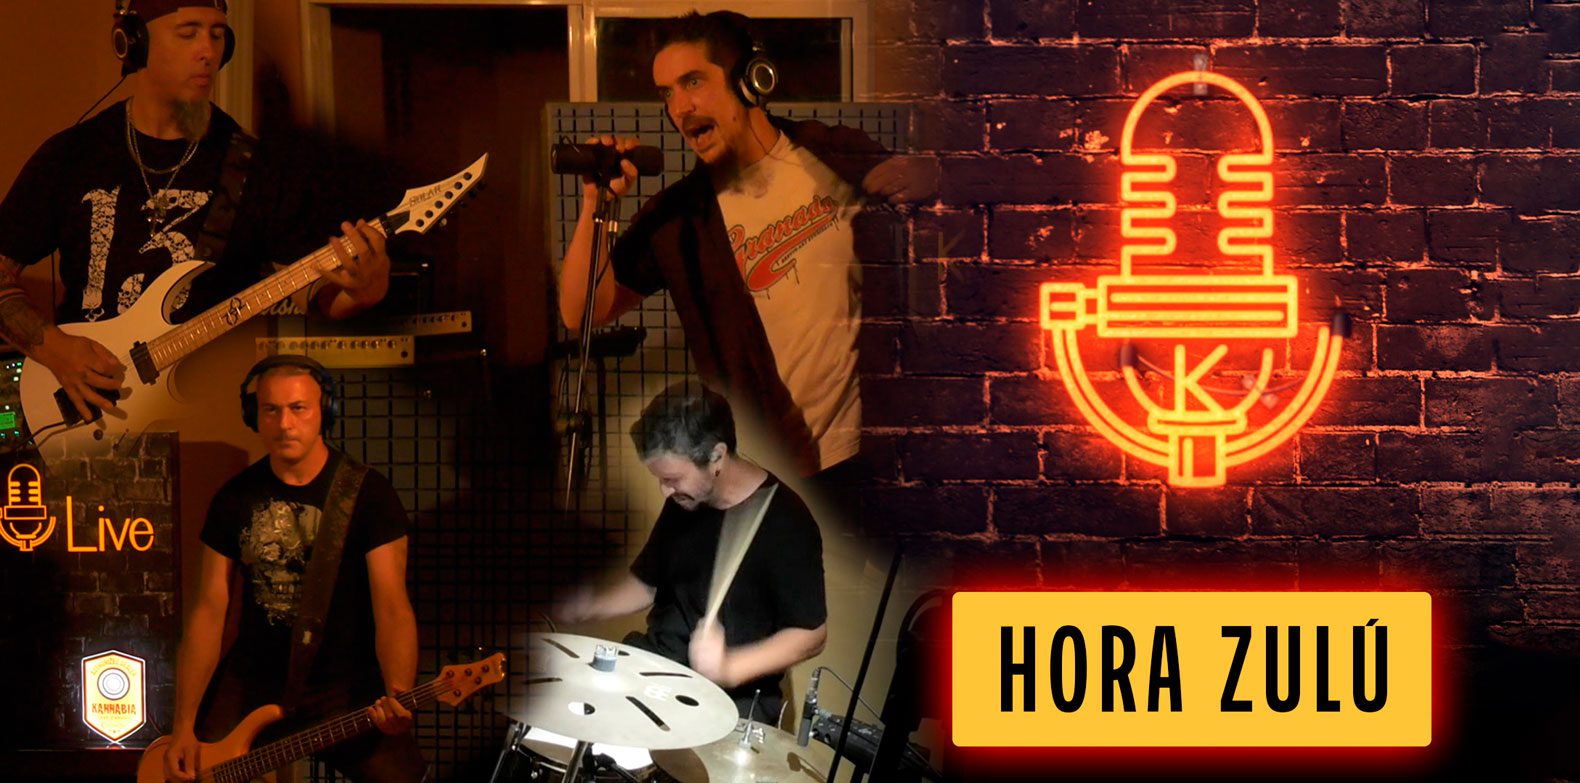 The “metal” energy of Hora Zulú bursts into the second installment from Knnb Live